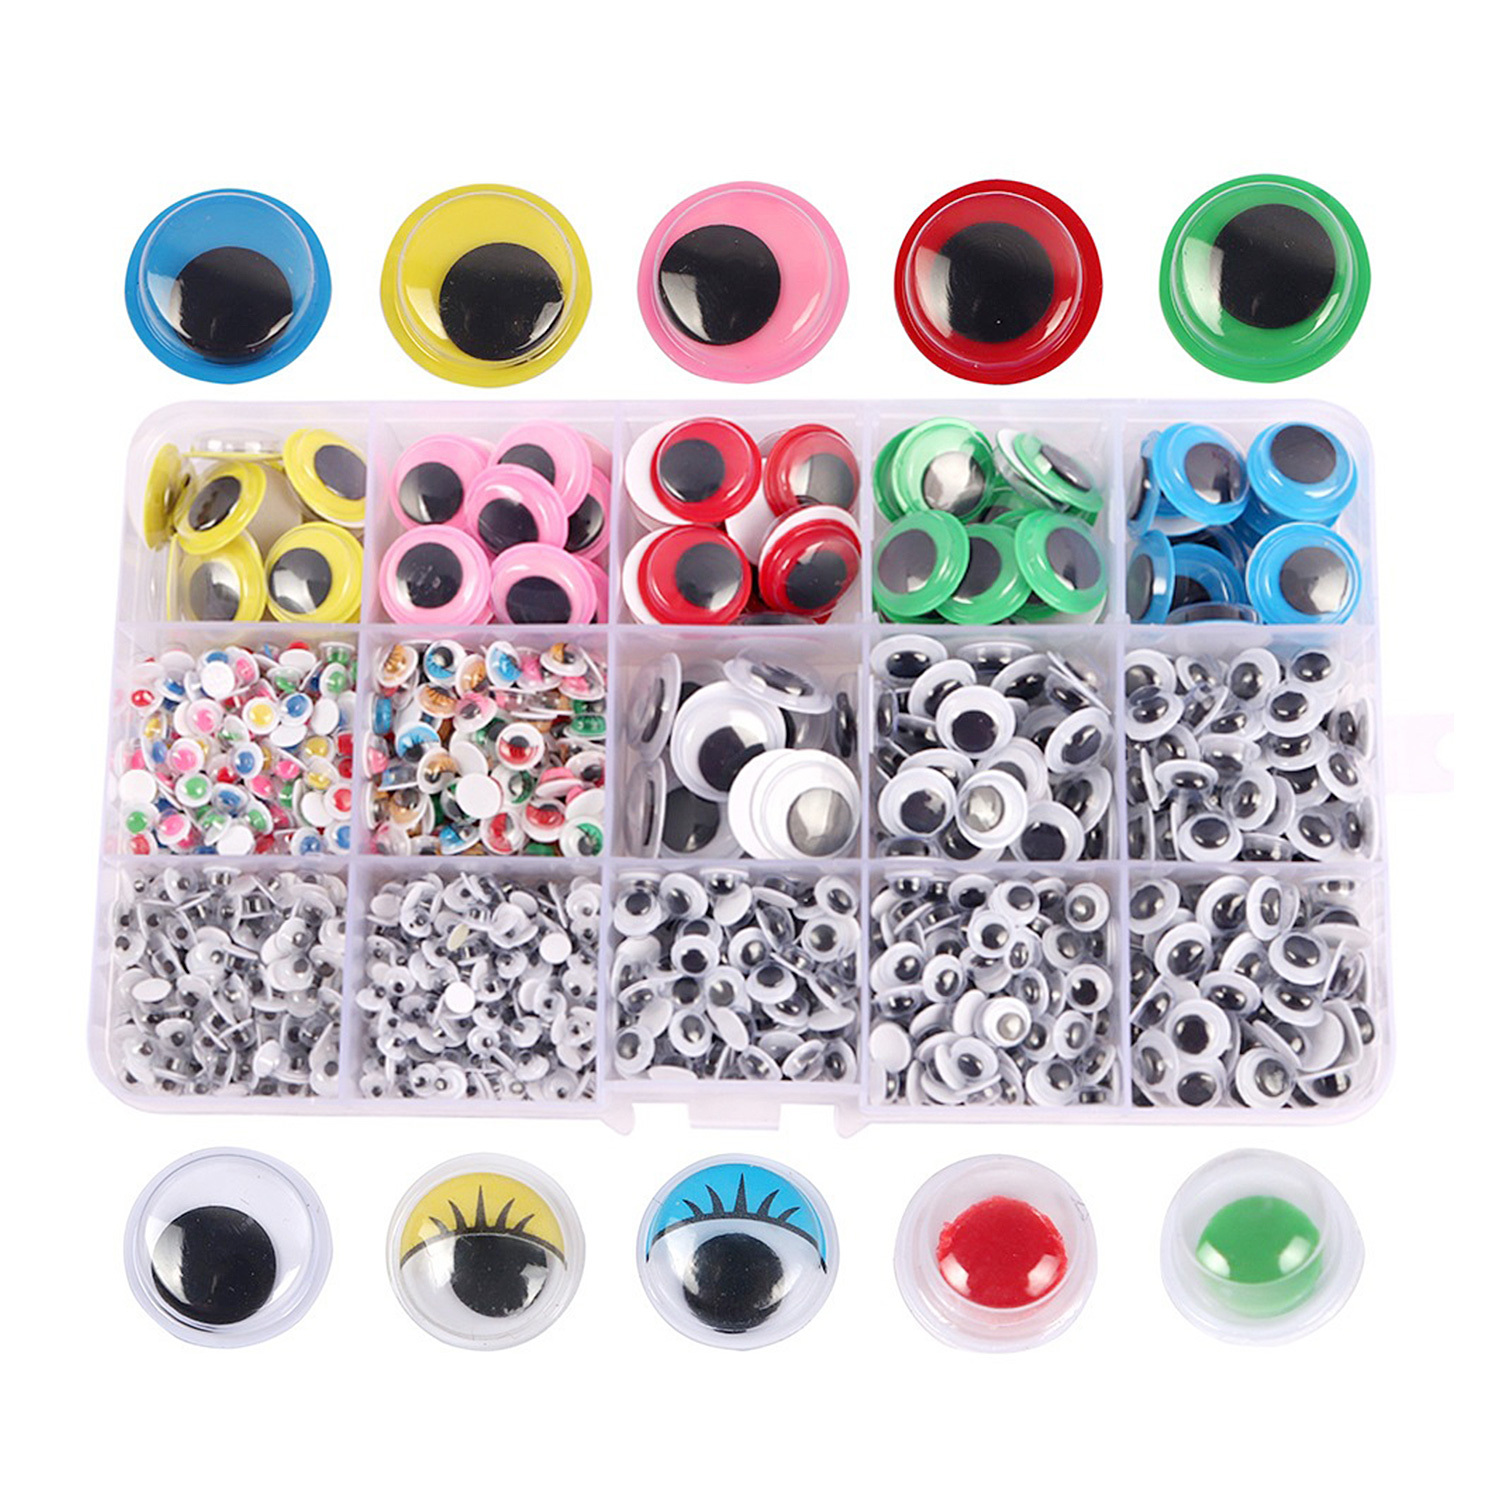 Googly Eyes, 1500 Mixed Colored Wiggle Eyes Self Adhesive Assorted